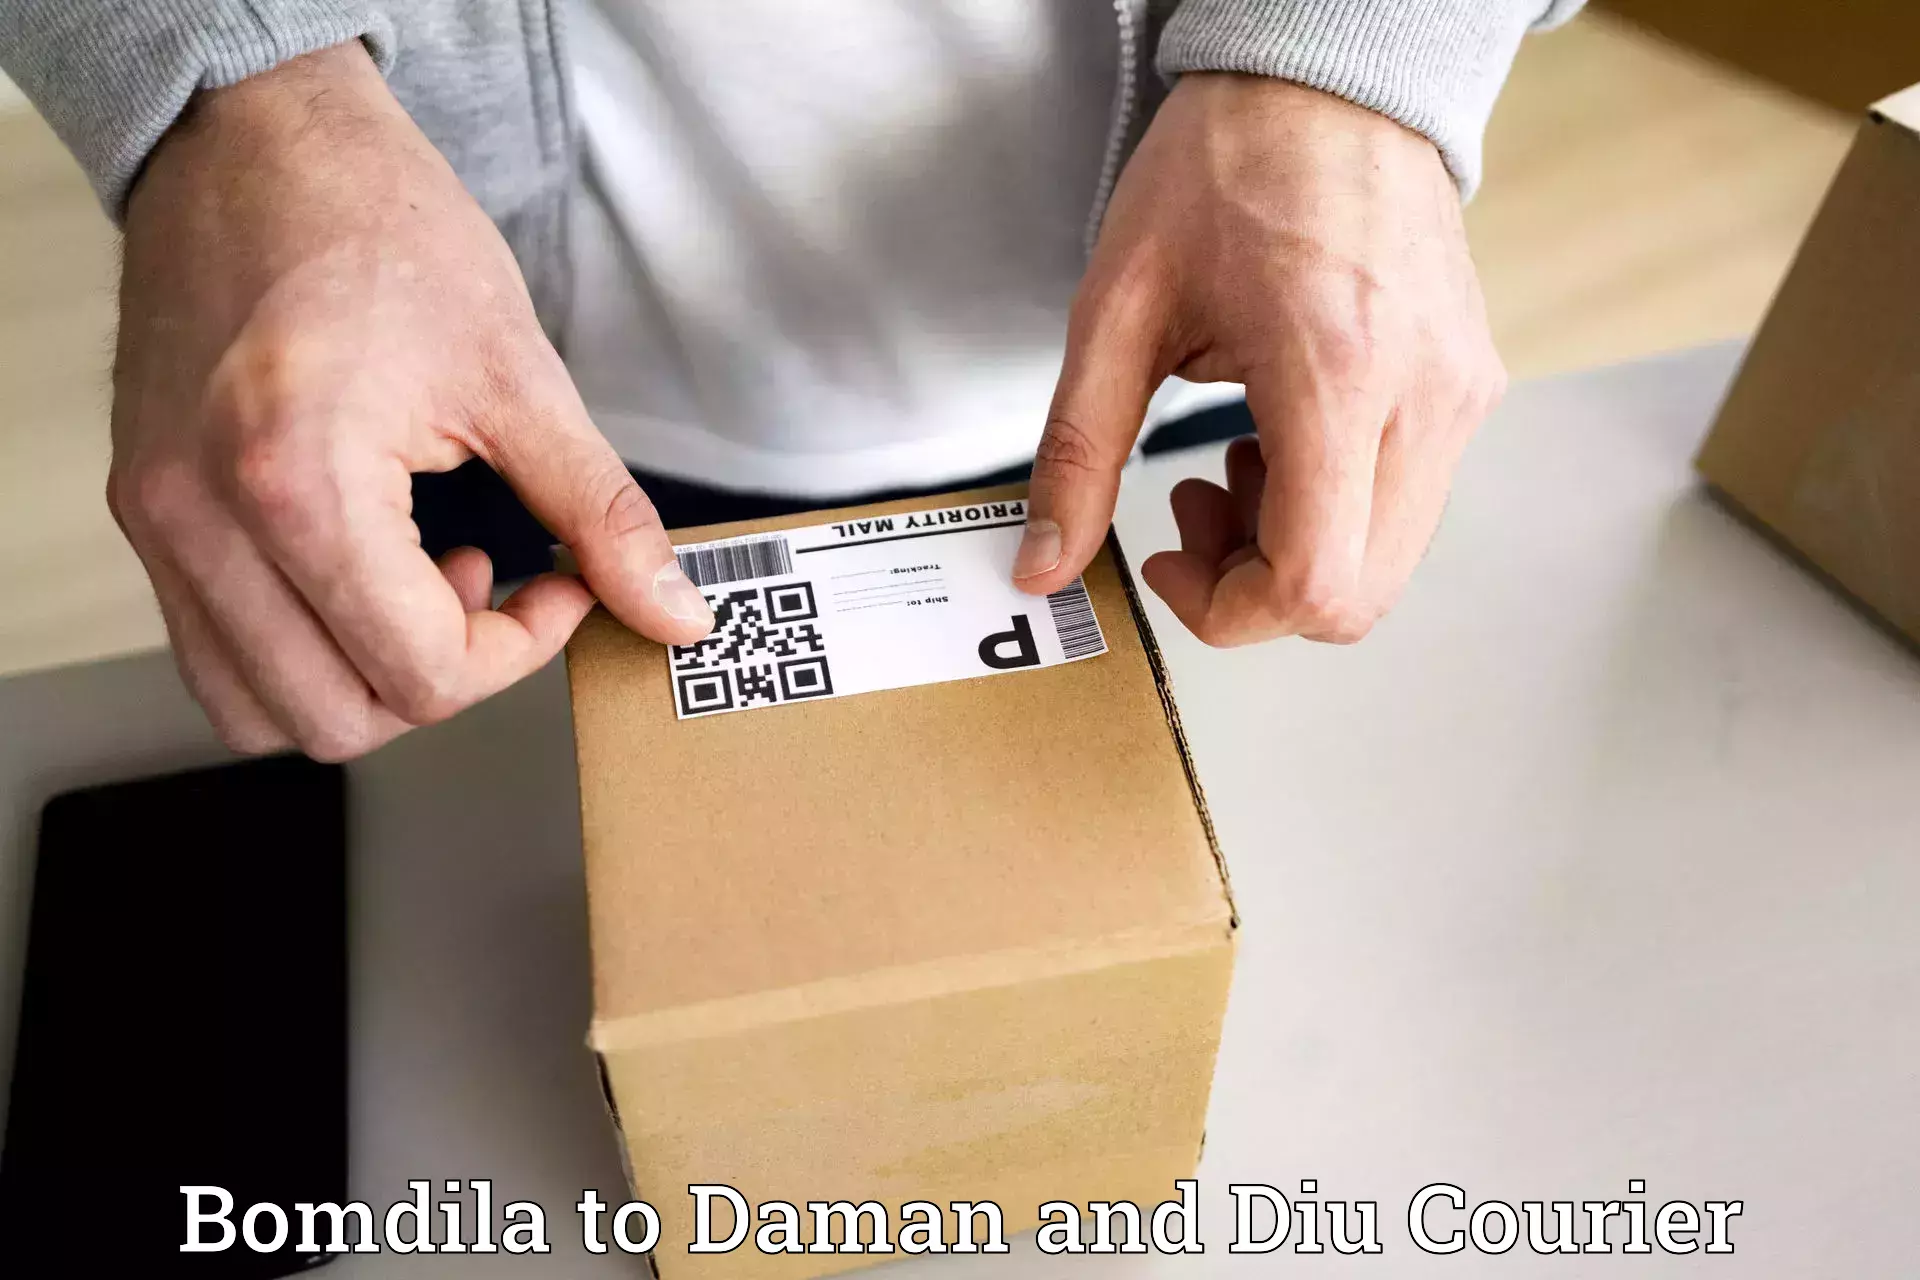 Overnight delivery services Bomdila to Daman and Diu